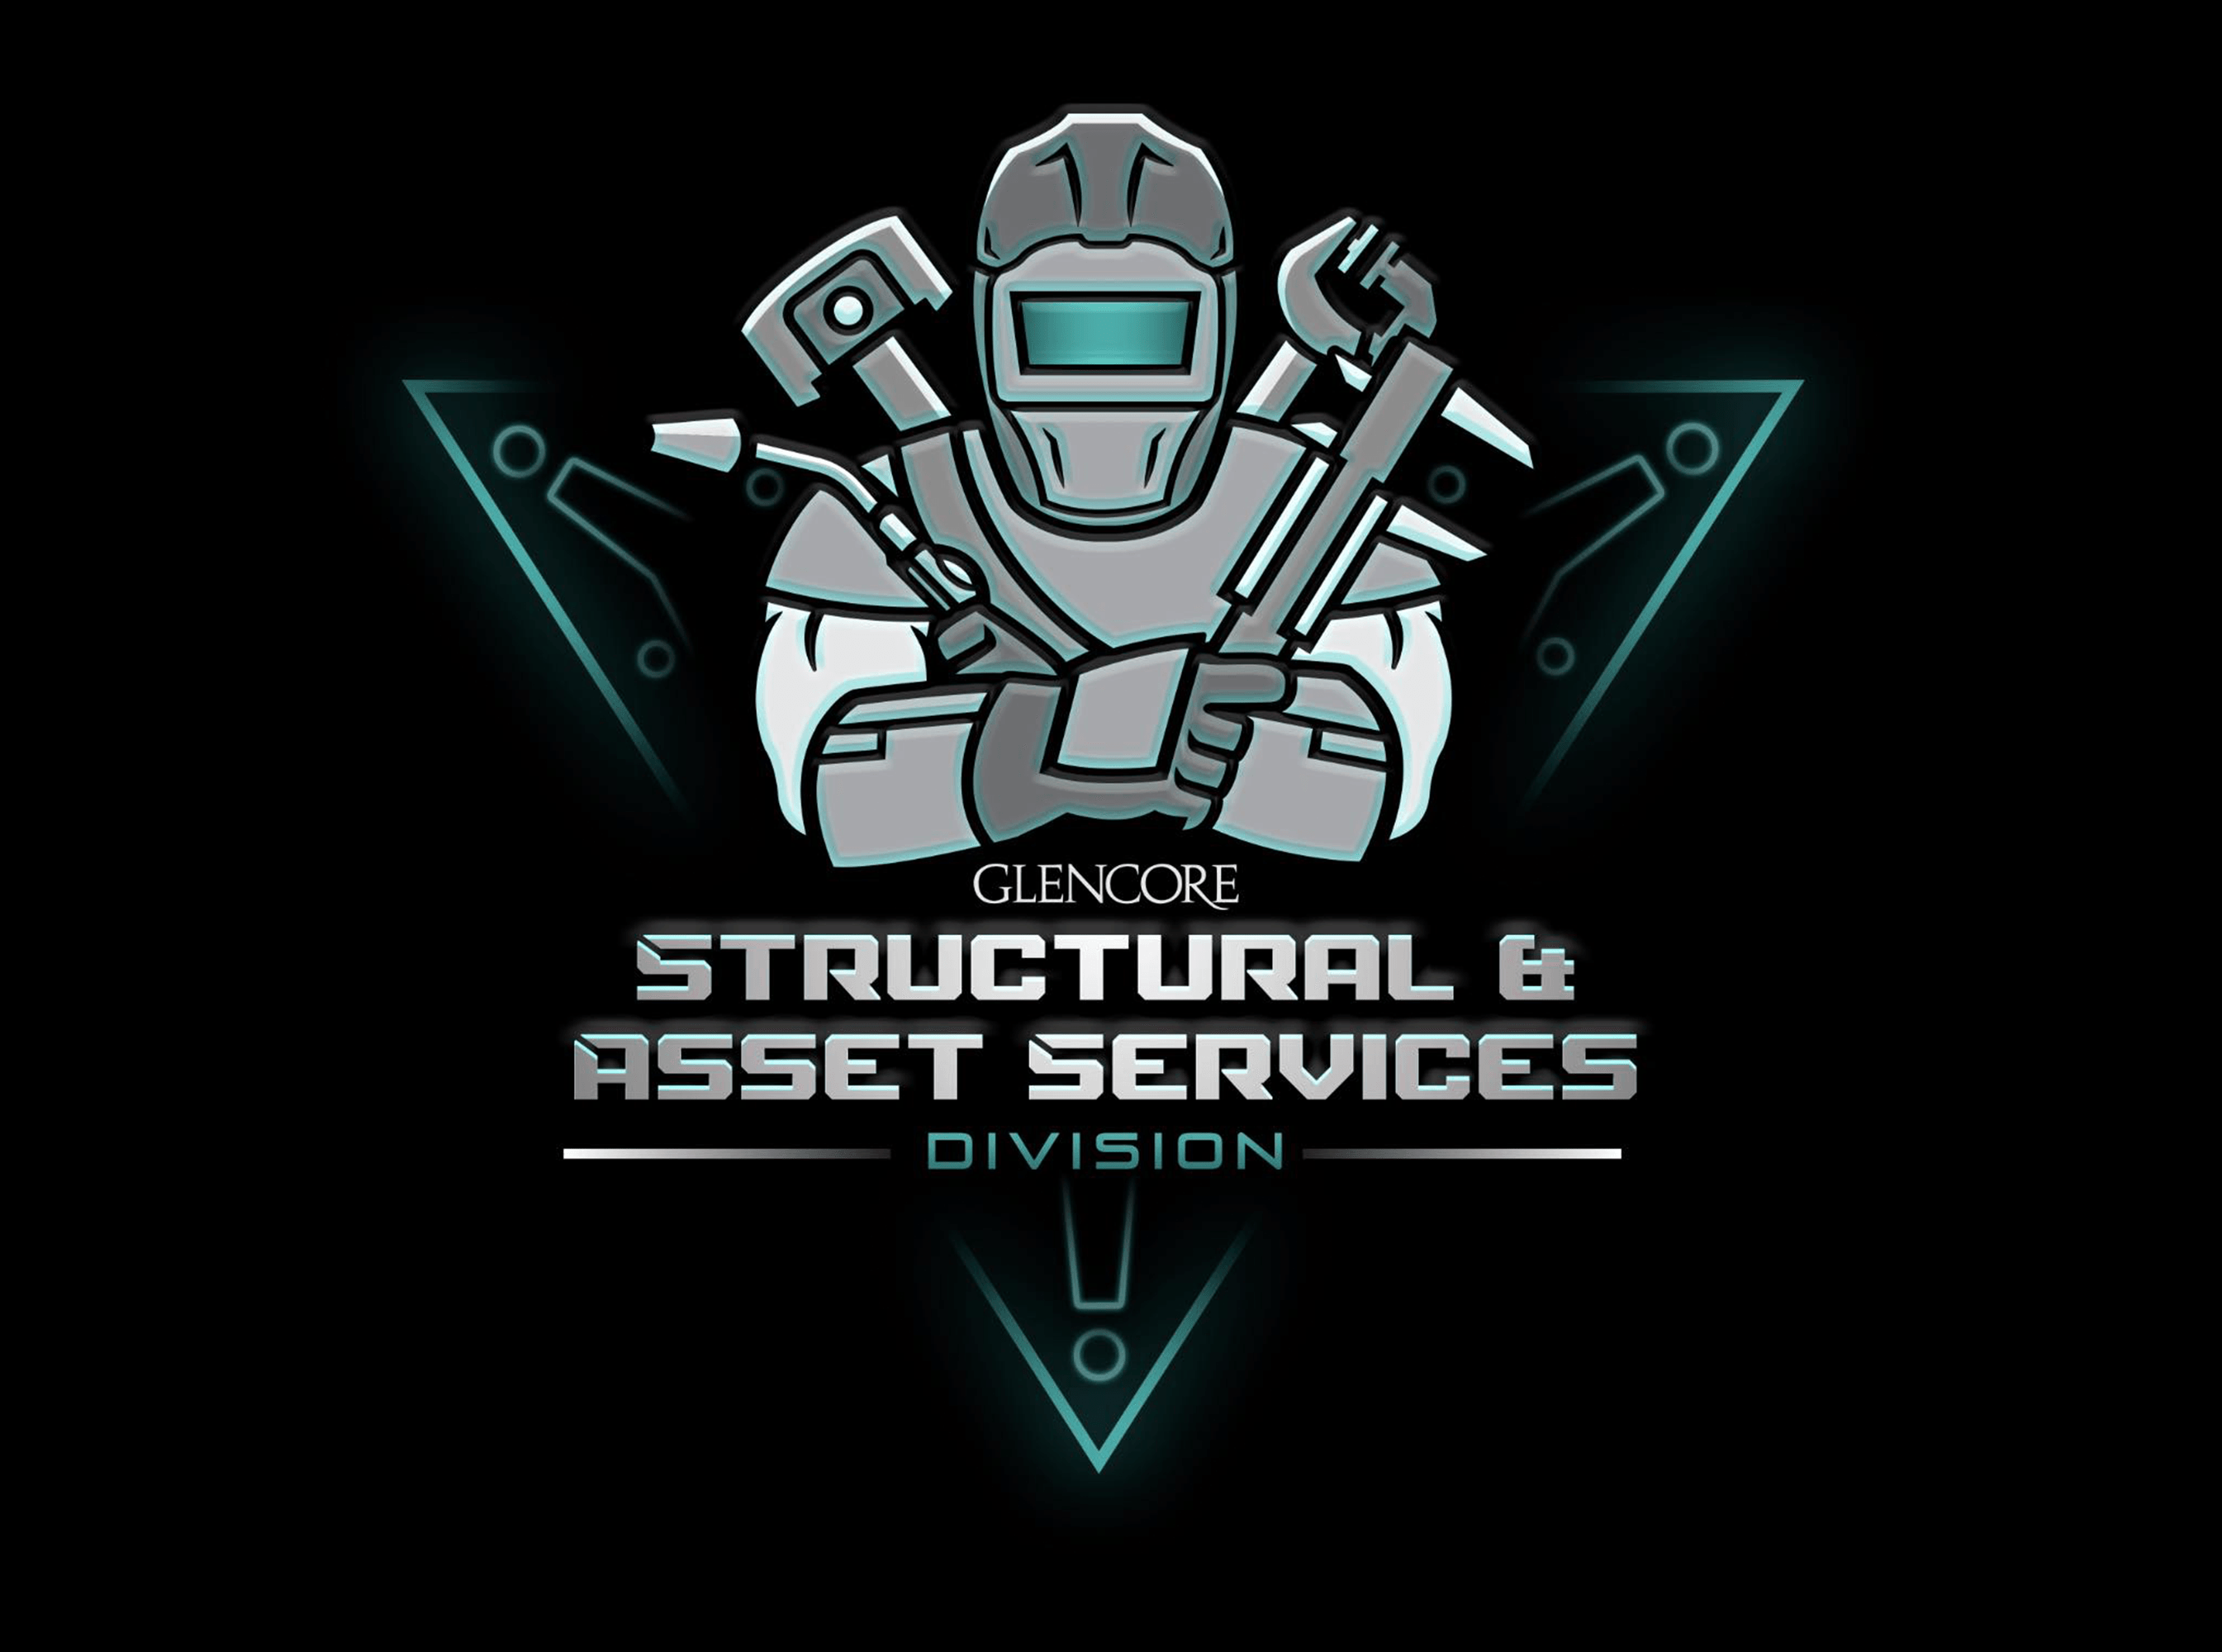 A sci-fi looking logo displaying a figure wearing a number of mining tools to represent the structural & assets services division